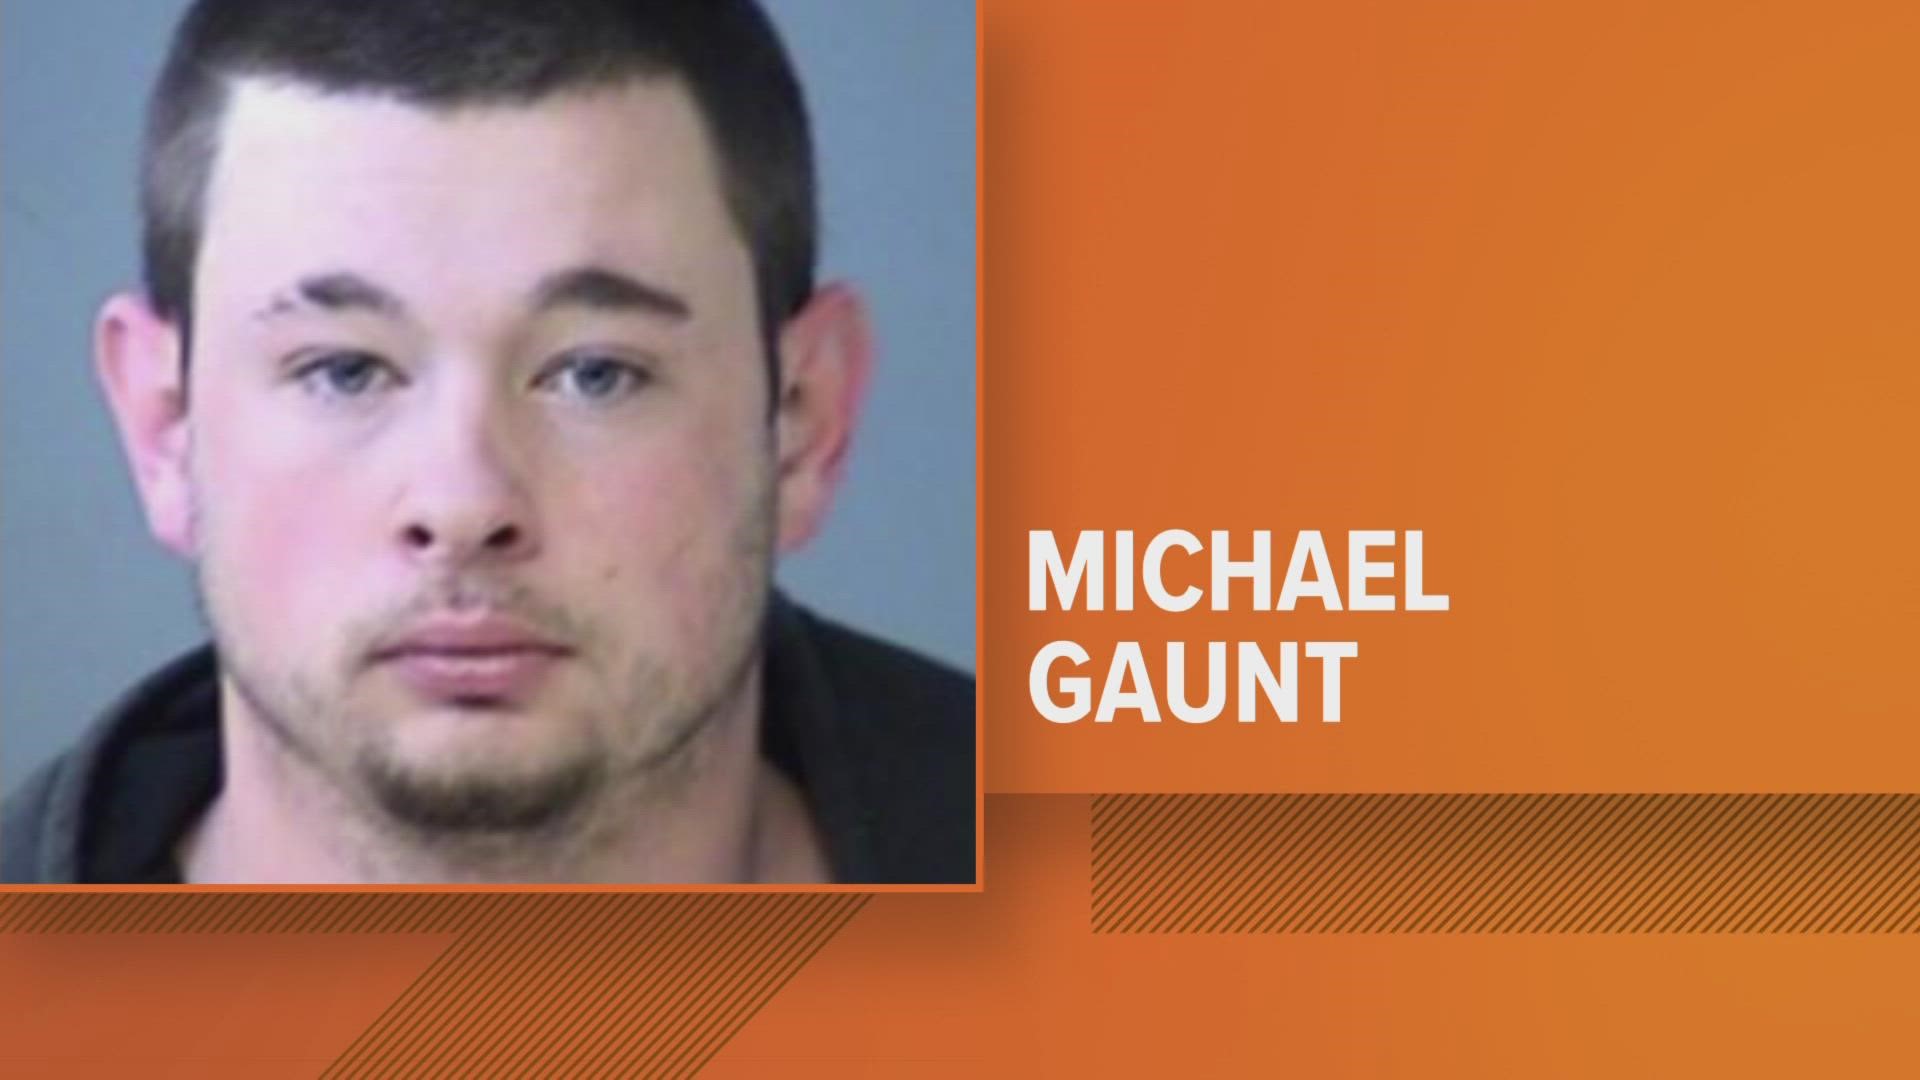 Michael Gaunt's sentencing hearing is set for Wednesday, May 25 at 2 p.m.